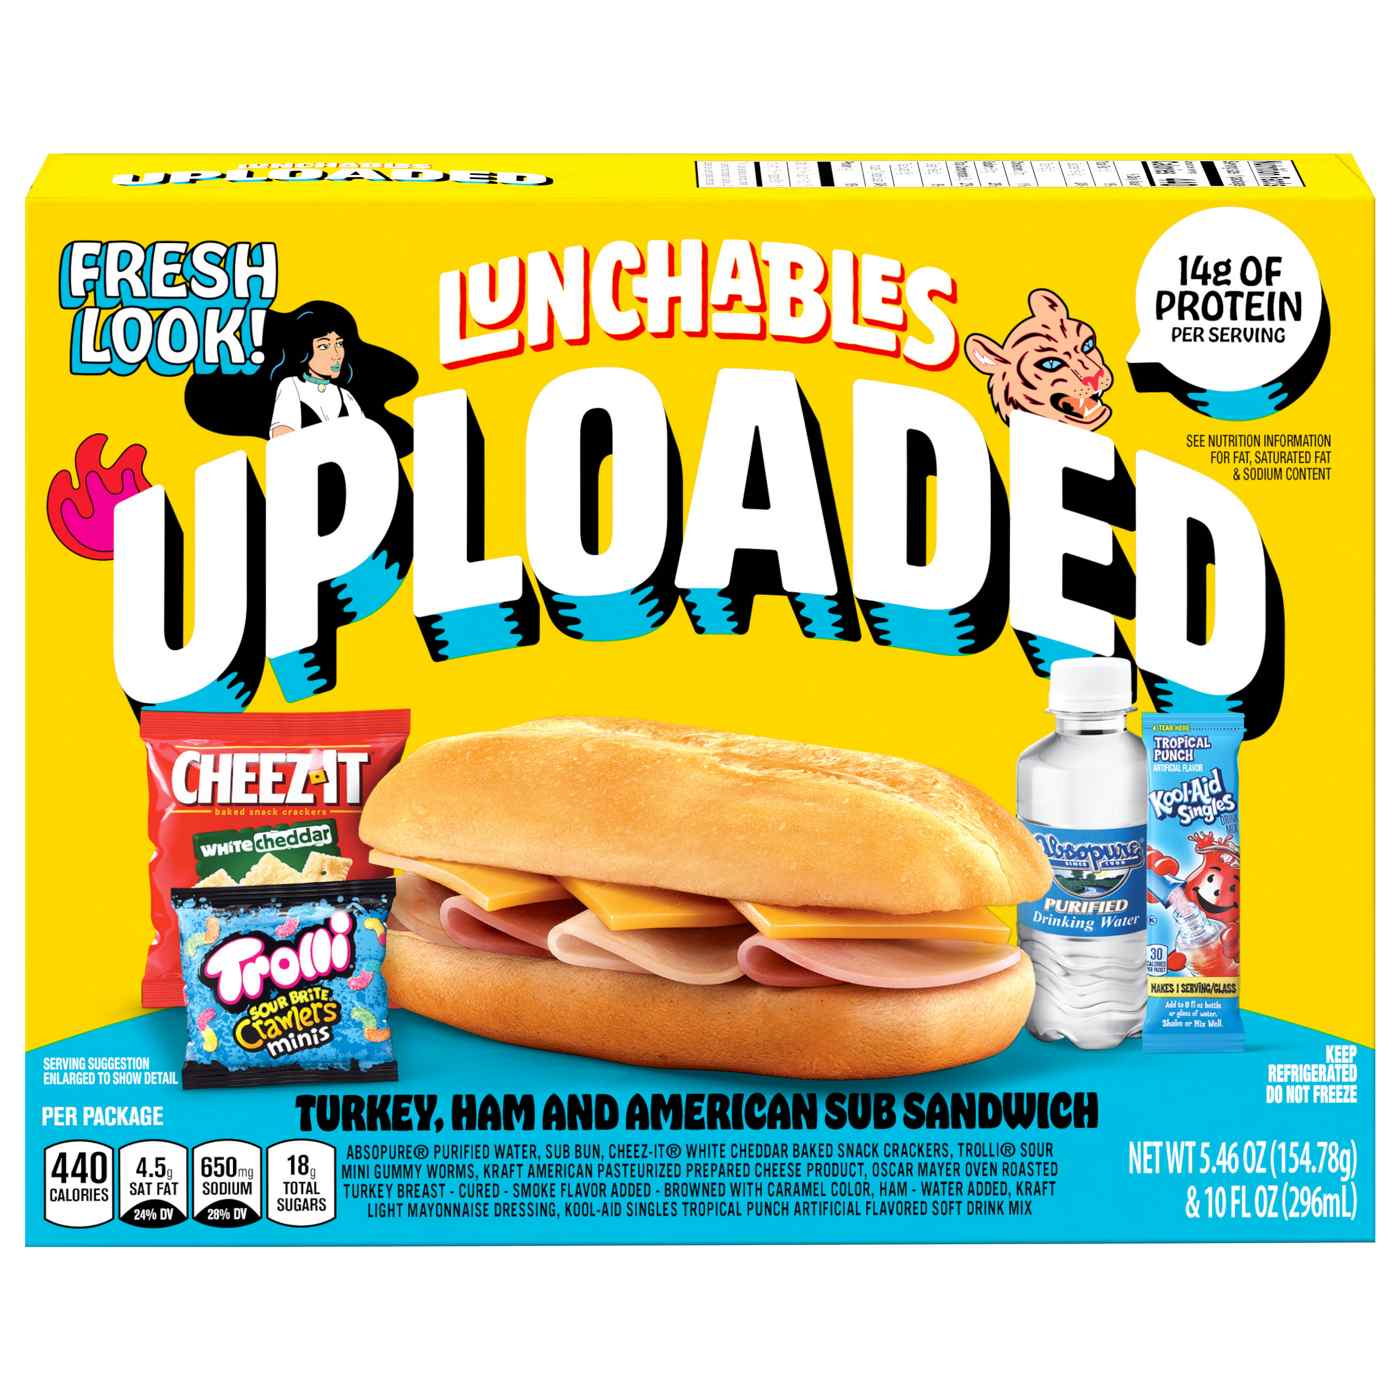 Lunchables Uploaded Meal Kit - Turkey Ham & American Sub Sandwich; image 2 of 5